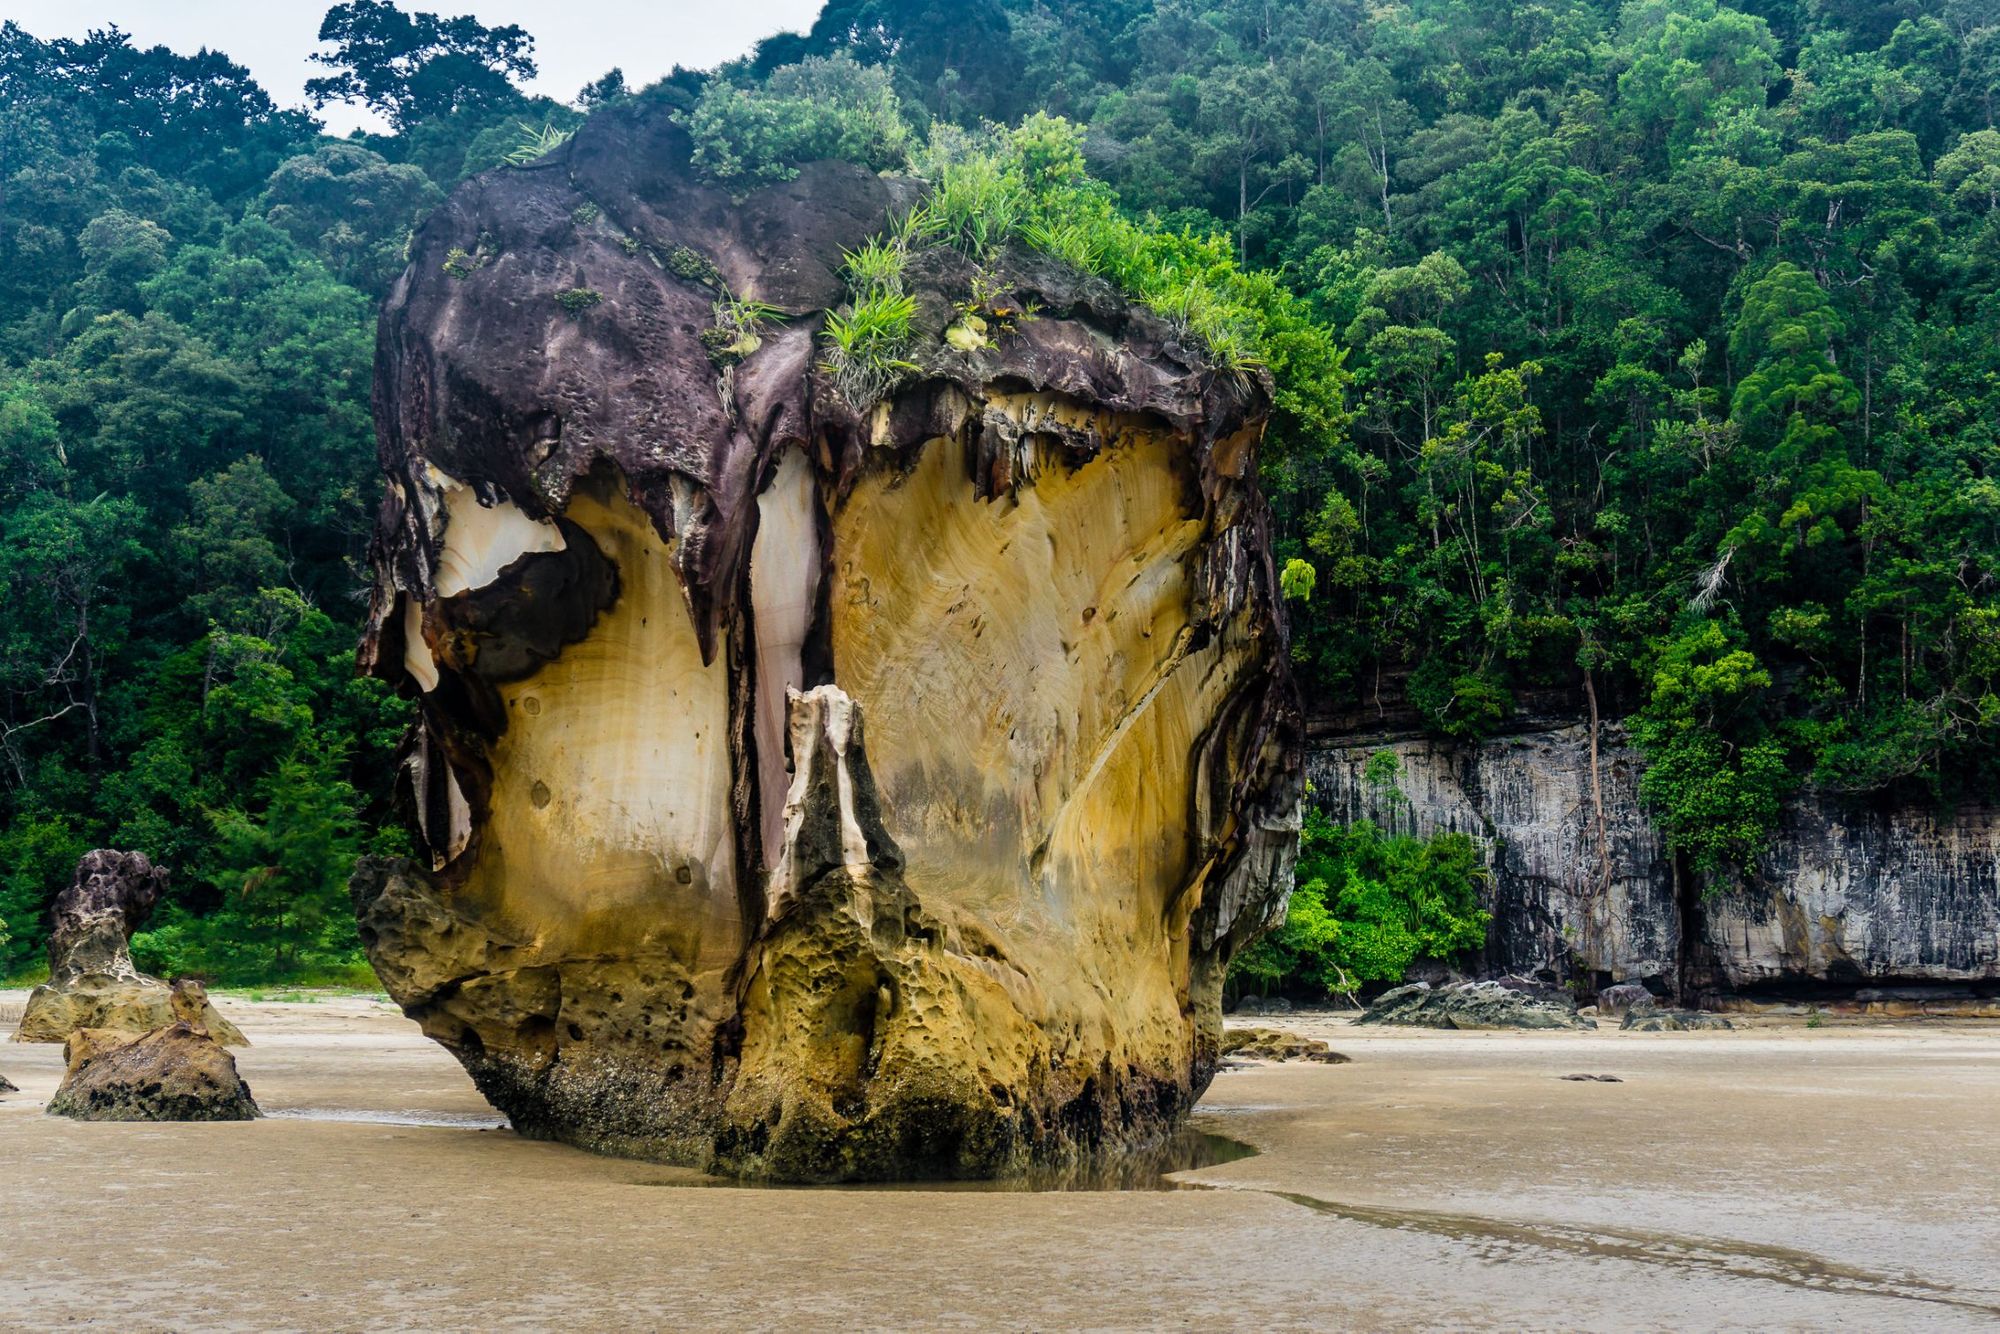 The coastal beauty of Bako National Park, where jungle meets ocean and eroded rock. Photo: Getty